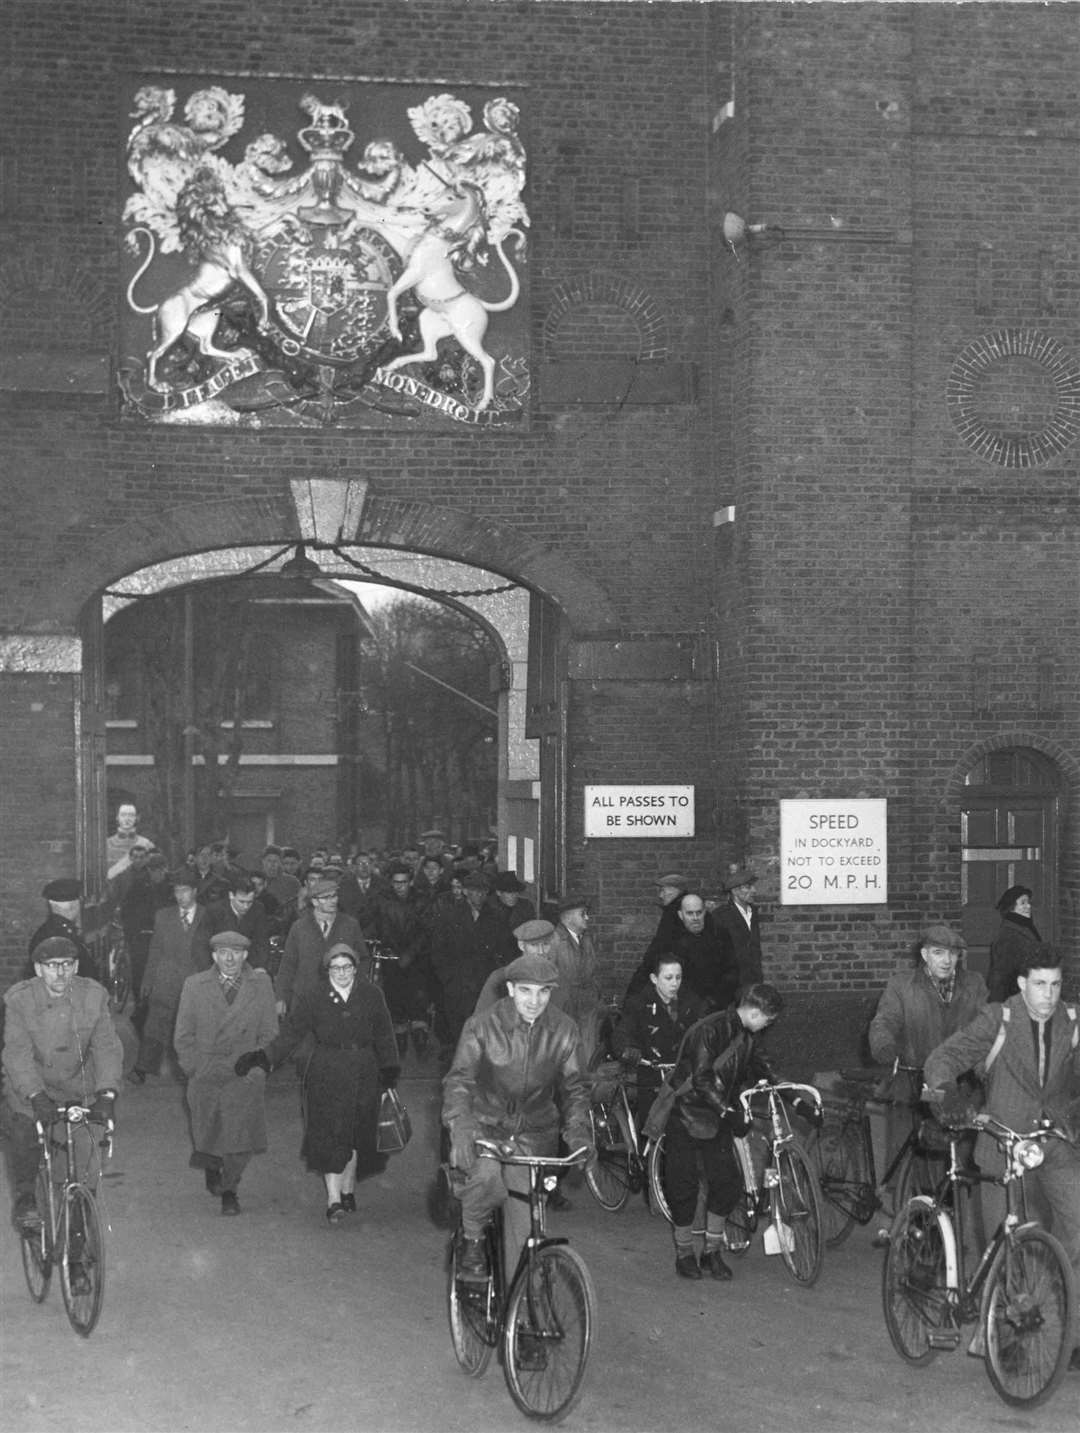 When the klaxon sounded, the workers went home. Chatham Dockyard Maingate was a busy place to be as workers cycled home after a day's work. This picture is from February 1958 but the scene was similar for many years.